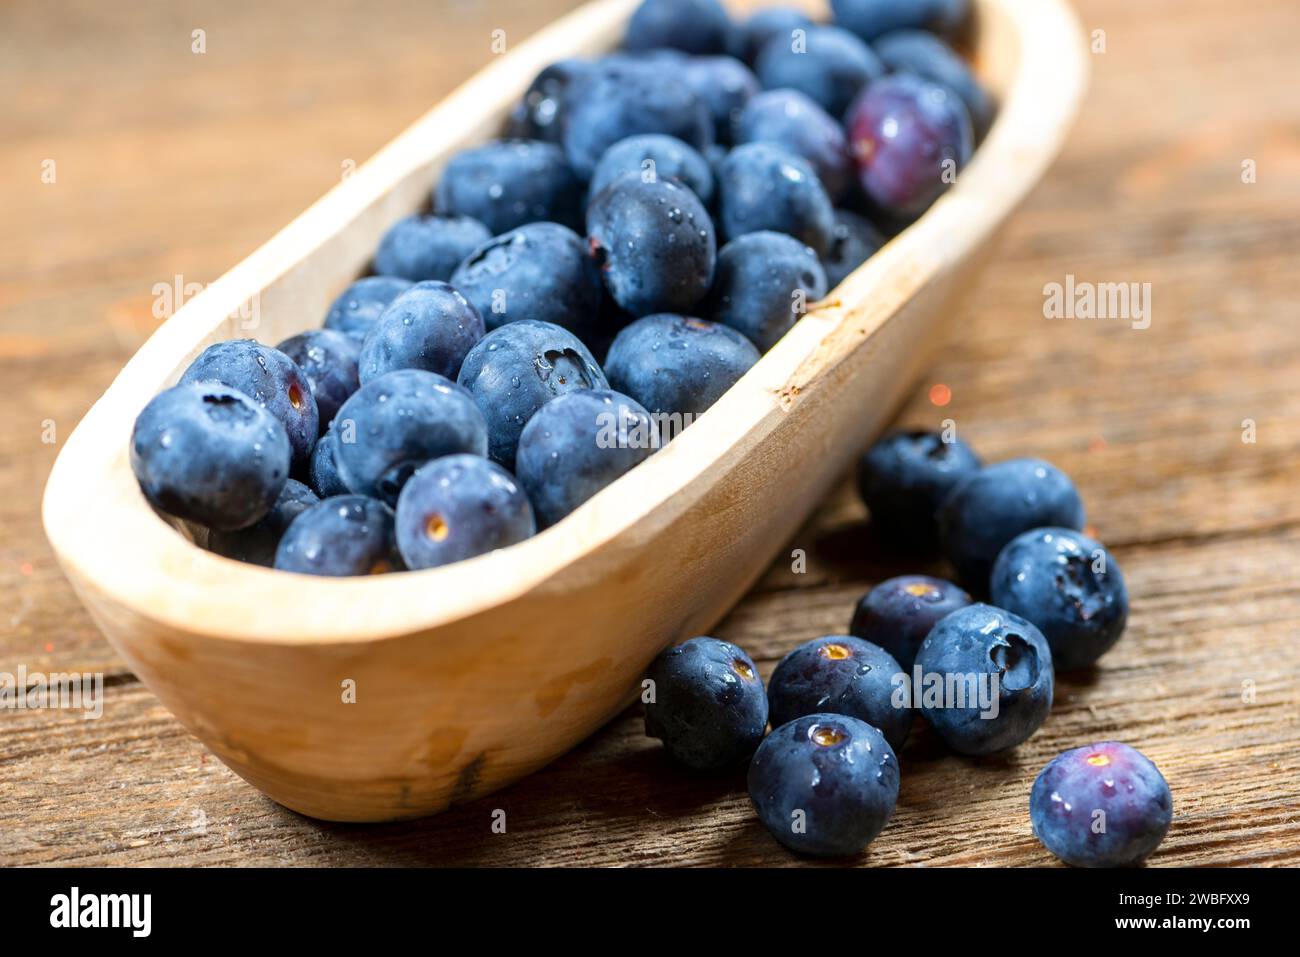 Wooden Bowl of fresh blueberries, in a small bowl on wooden plank,  nutritious food items. Stock Photo